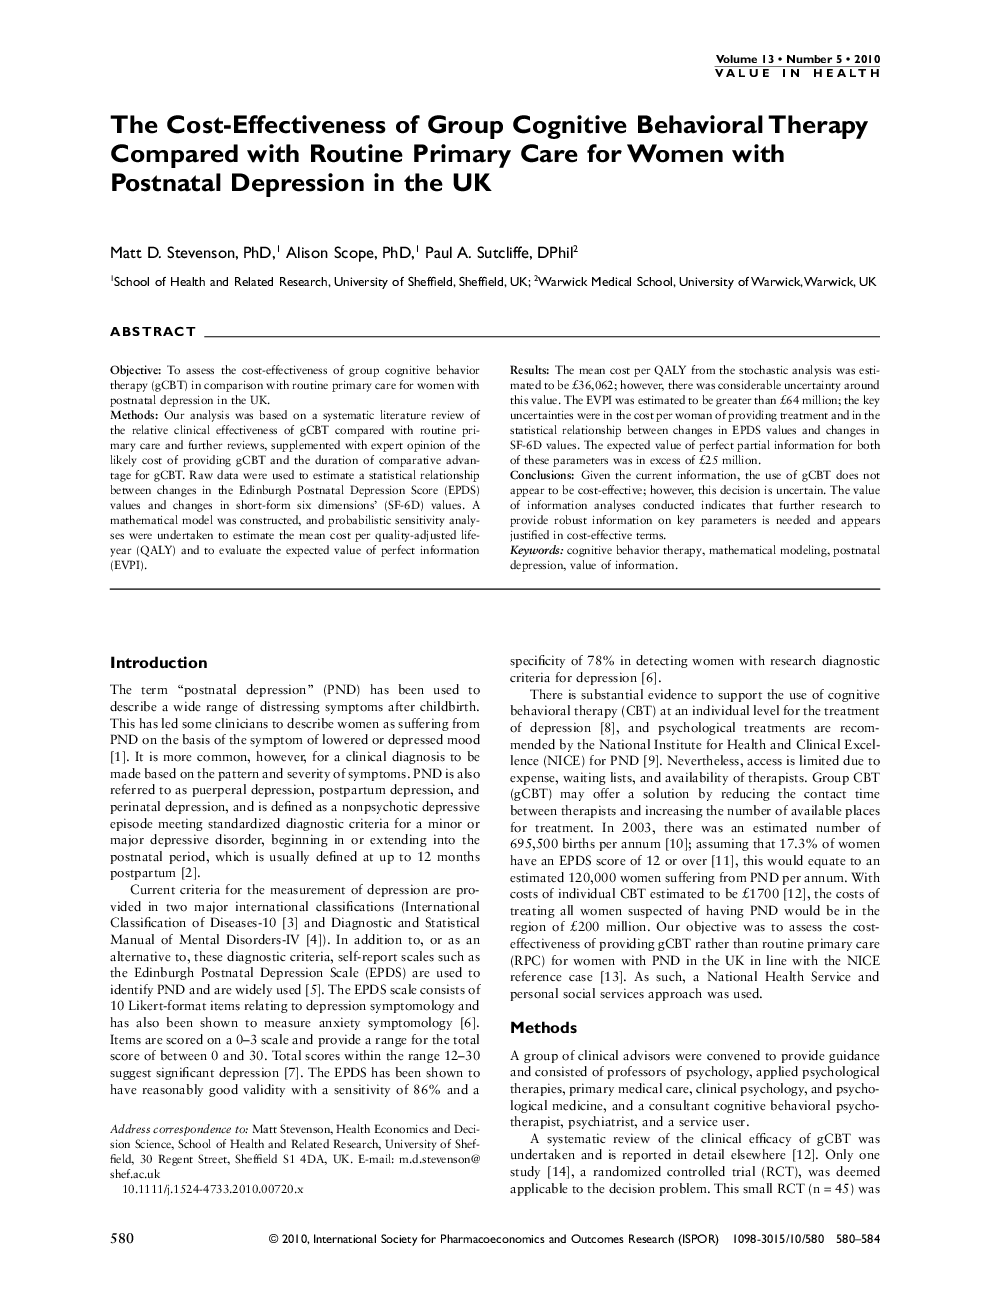 The Cost-Effectiveness of Group Cognitive Behavioral Therapy Compared with Routine Primary Care for Women with Postnatal Depression in the UK